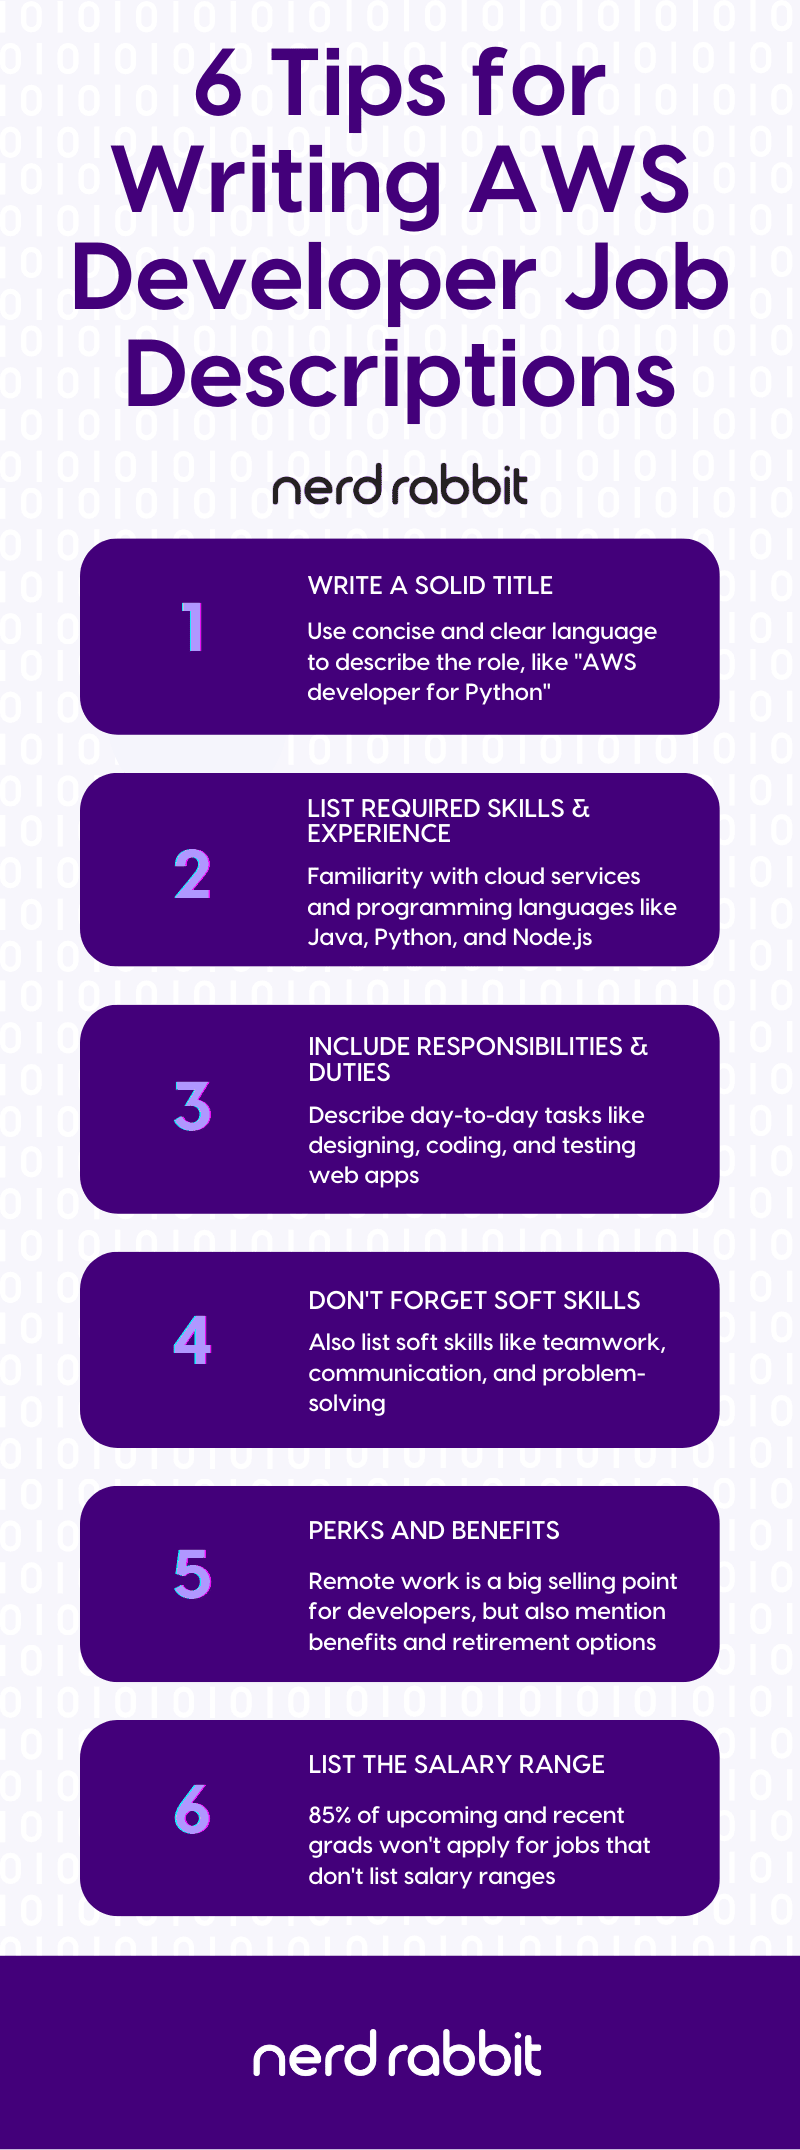 An infographic displaying six tips for writing AWS developer job descriptions.